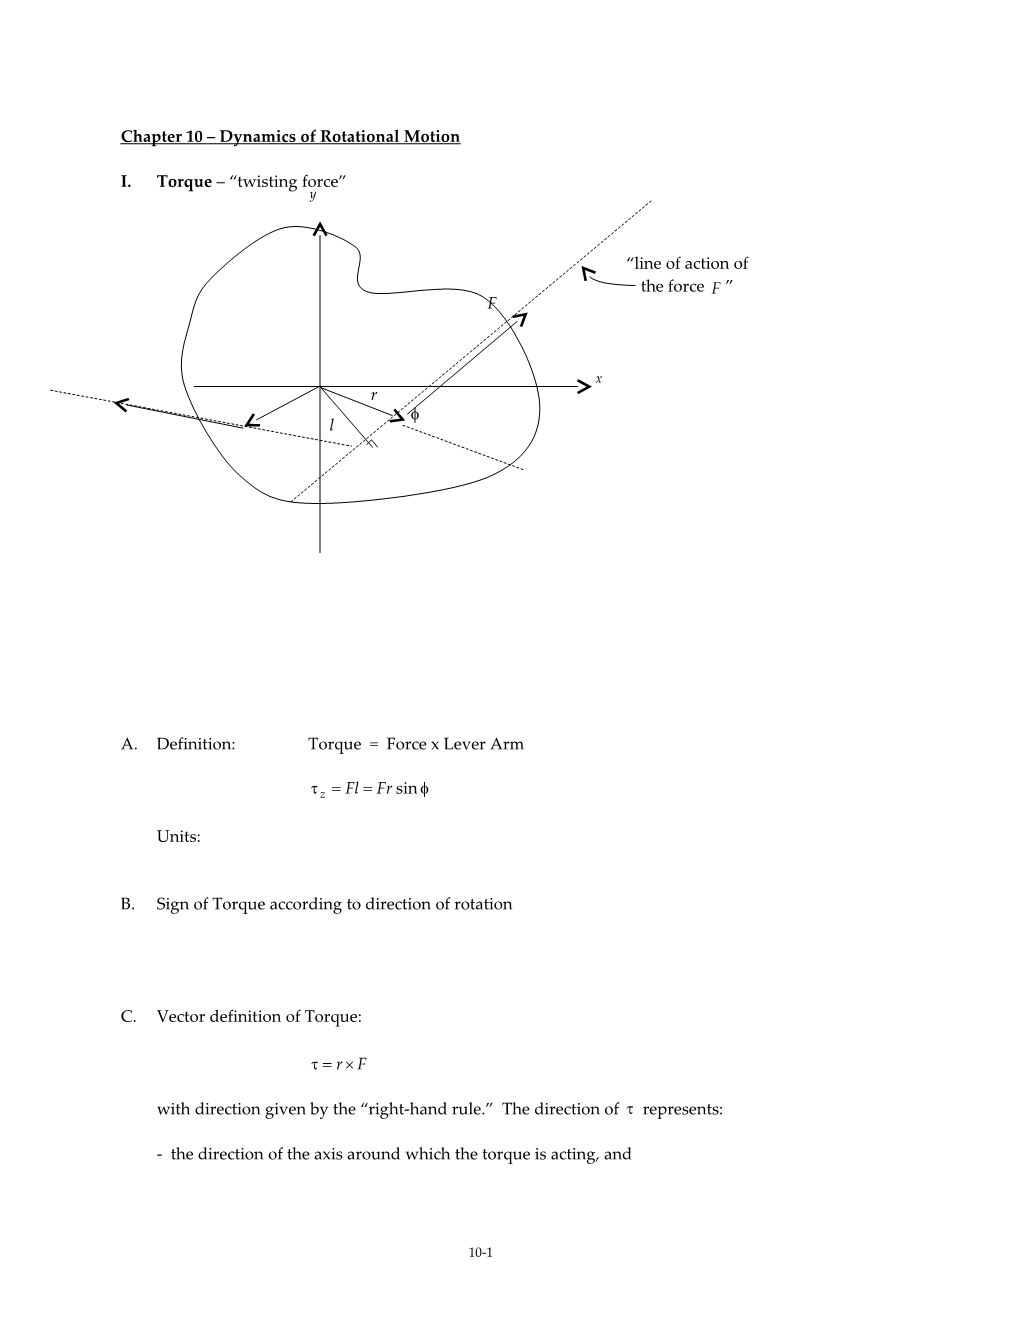 Chapter 10 Dynamics of Rotational Motion